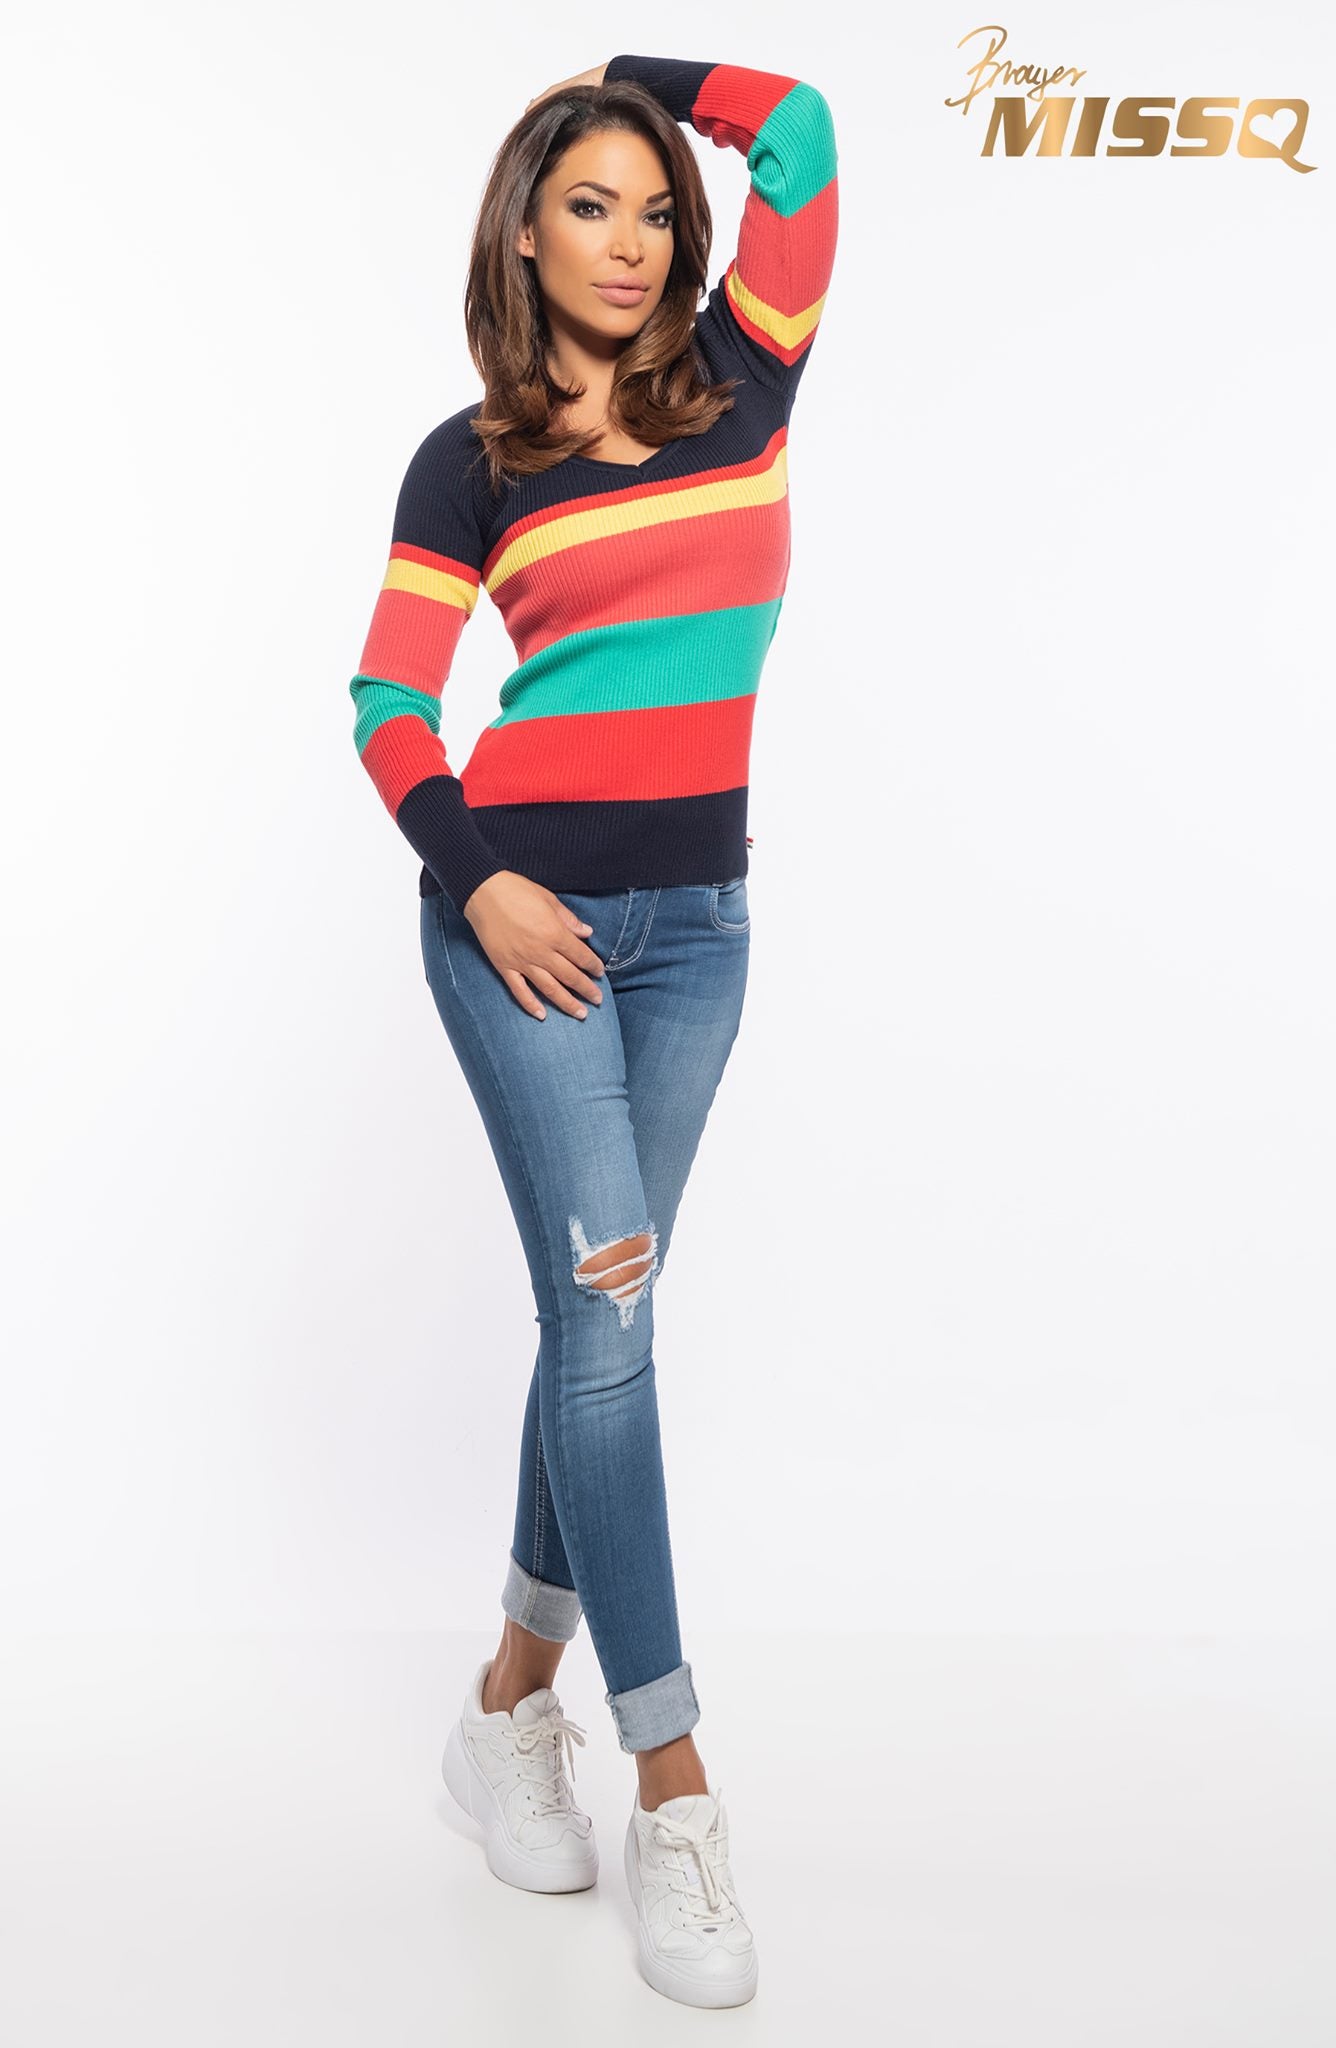 MissQ Classic Turtle or Round Neck Knitted Sweater